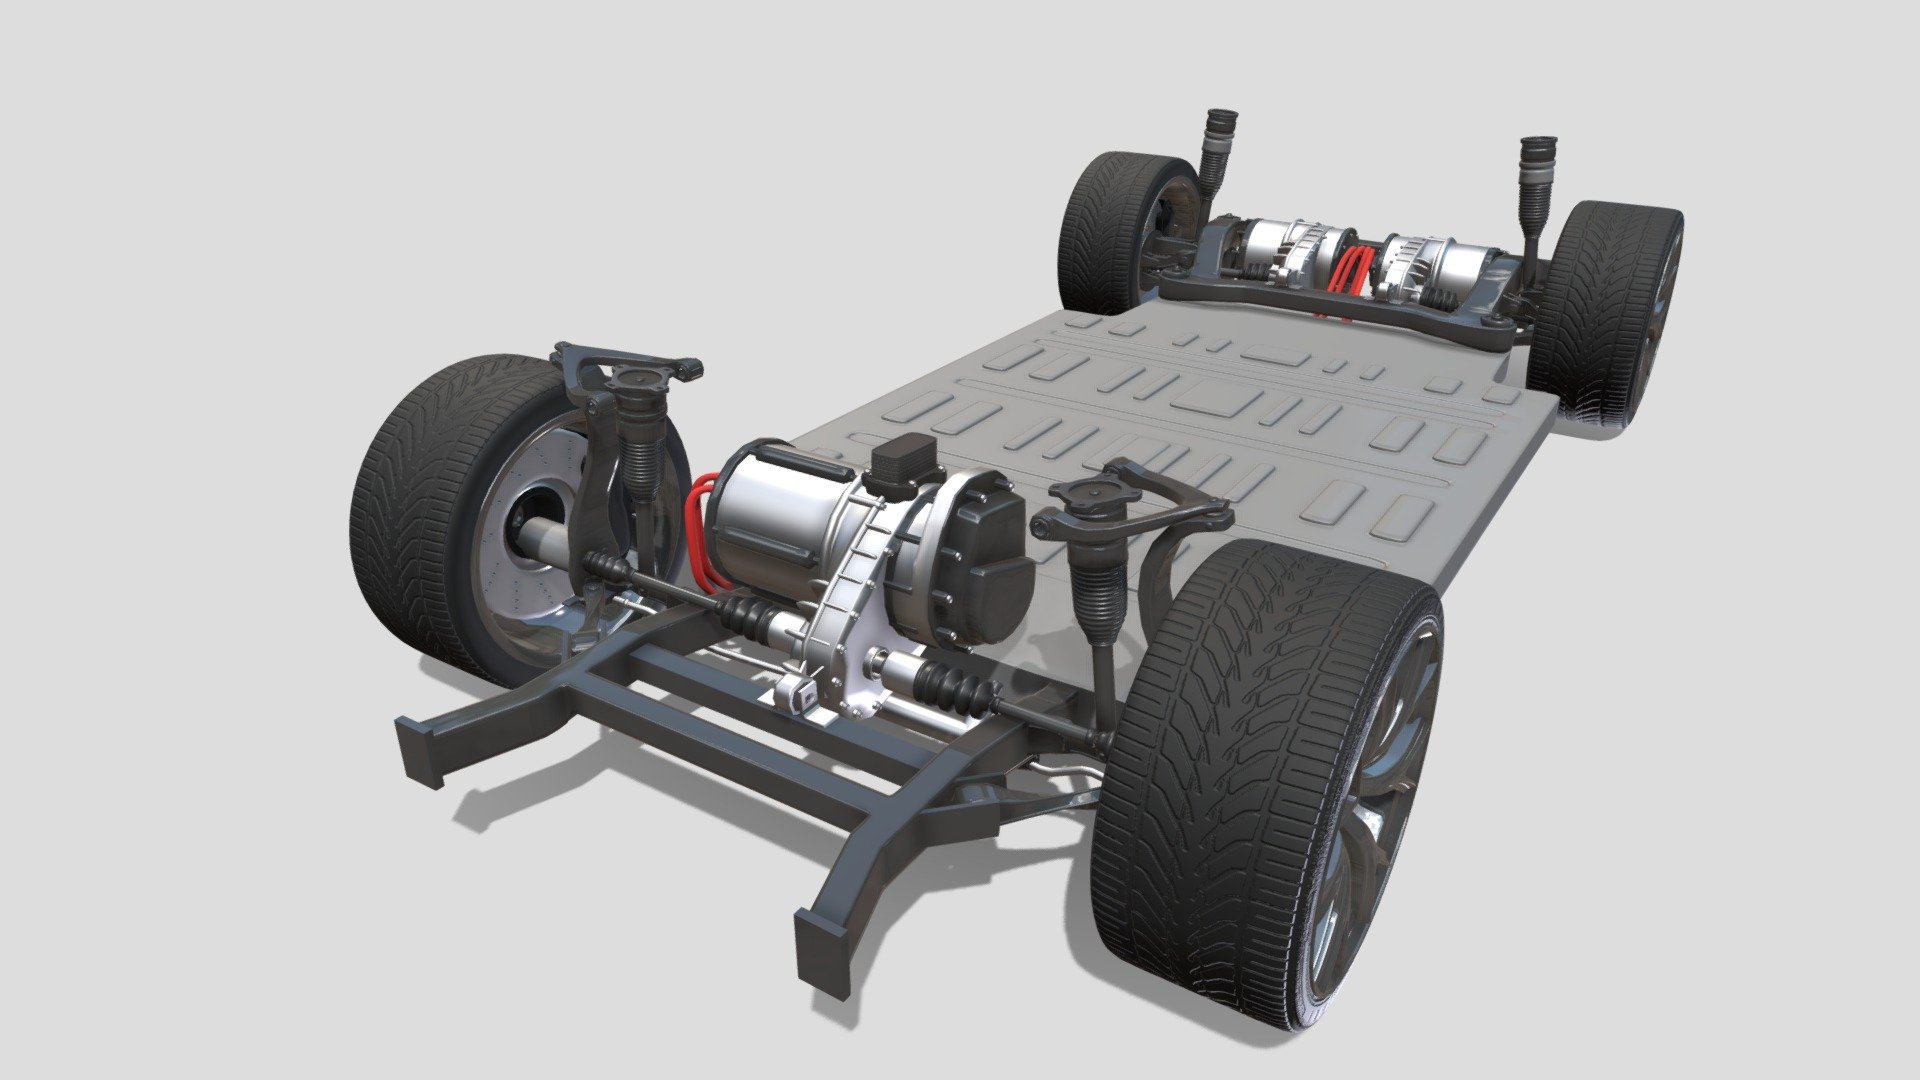 Tesla Roadster 2020 Chassis 3D model, with a 3 motor setup, brakes, steering rack and battery pack modeled.

File formats:
-.blend, rendered with cycles, as seen in the images;
-.obj, with materials applied and textures;
-.dae, with materials applied and textures;
-.fbx, with material slots applied;
-.stl;

3D Software:
This 3d model was originally created in Blender 2.79 and rendered with Cycles.

Materials and textures:
The model has materials applied in all formats, and is ready to import and render.
The model comes with multiple png image textures.

Preview scenes:
The preview images are rendered in Blender using its built-in render engine &lsquo;Cycles'.
Note that the blend files come directly with the rendering scene included and the render command will generate the exact result as seen in previews.
Scene elements are on a different layer from the actual model for easier manipulation of objects 3d model